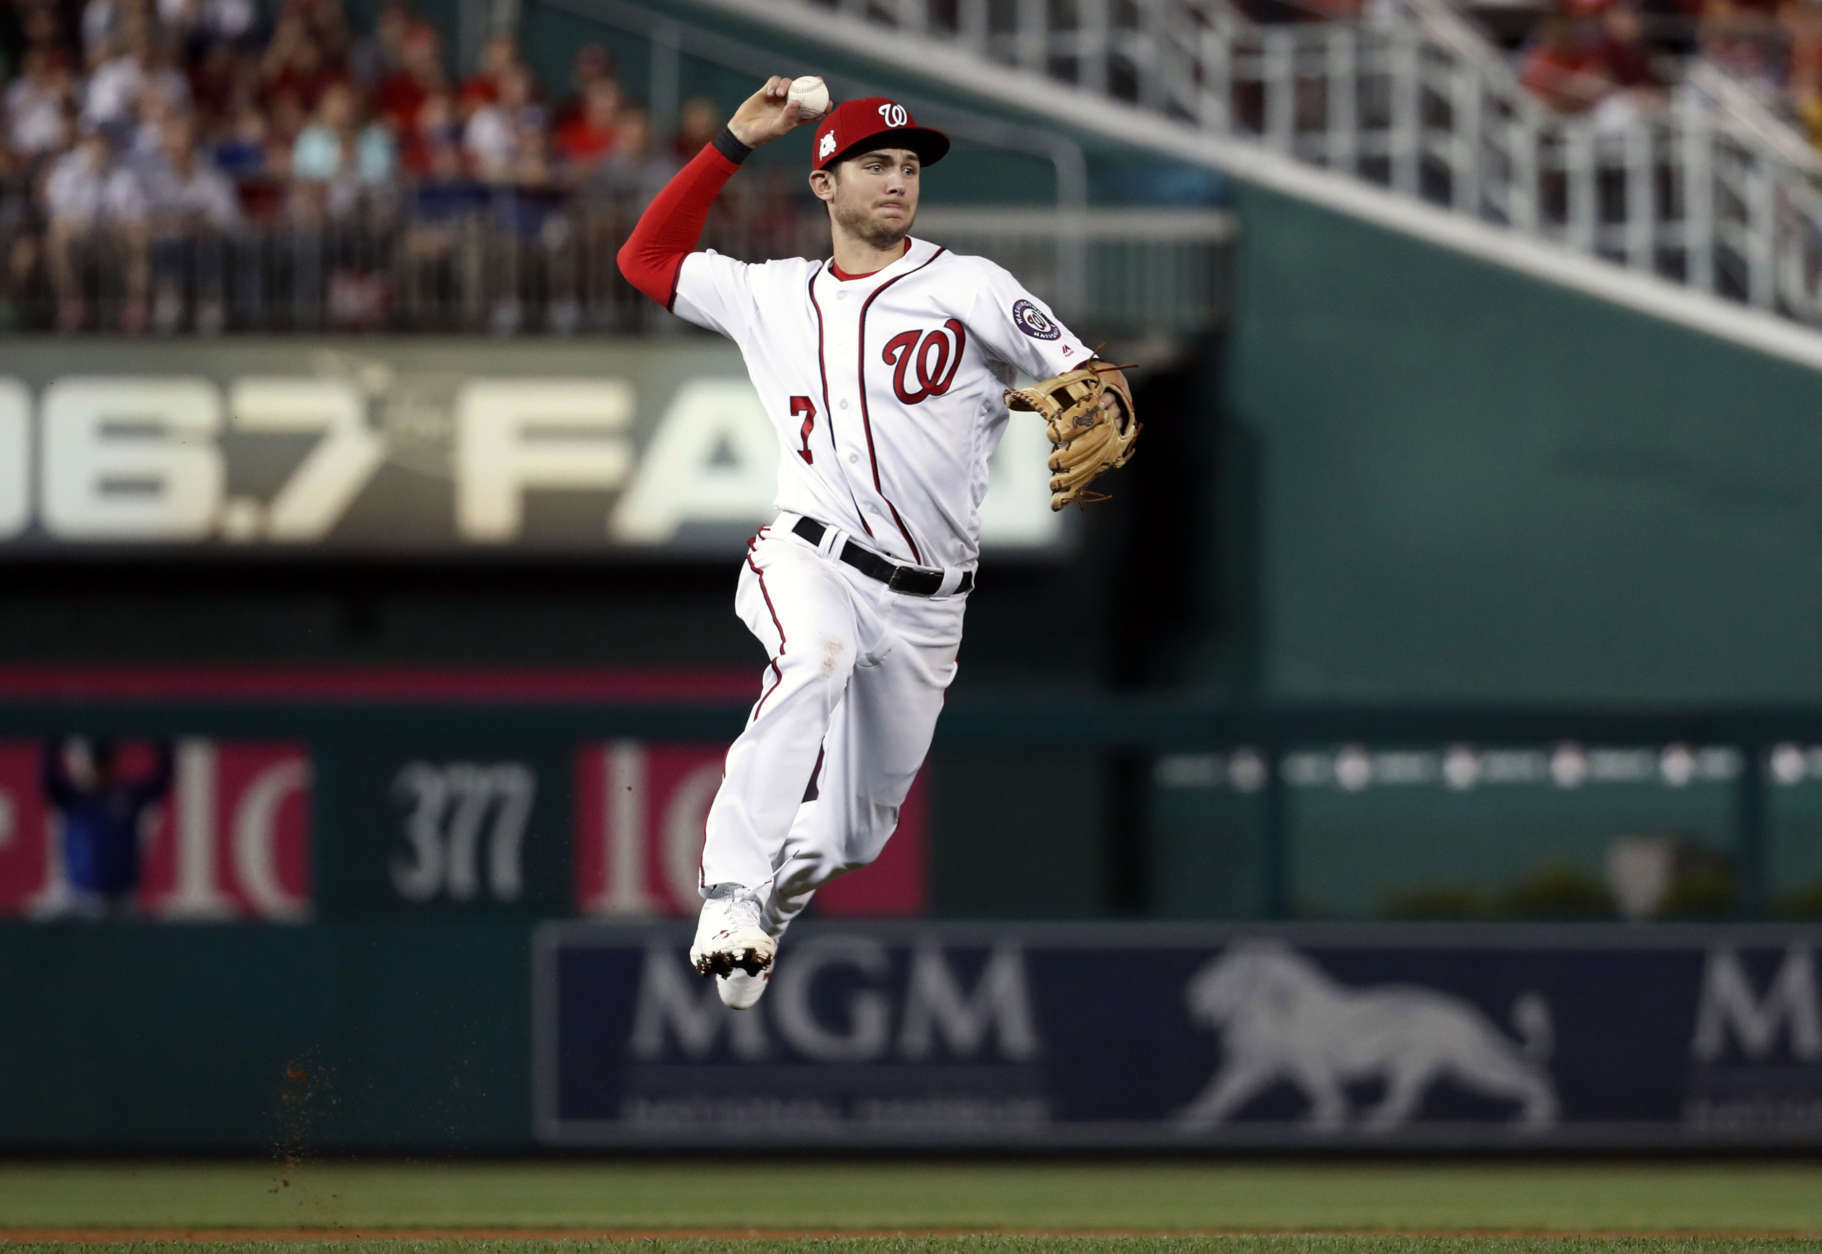 Series Preview: Chicago Cubs (13-21) @ Washington Nationals (19-15